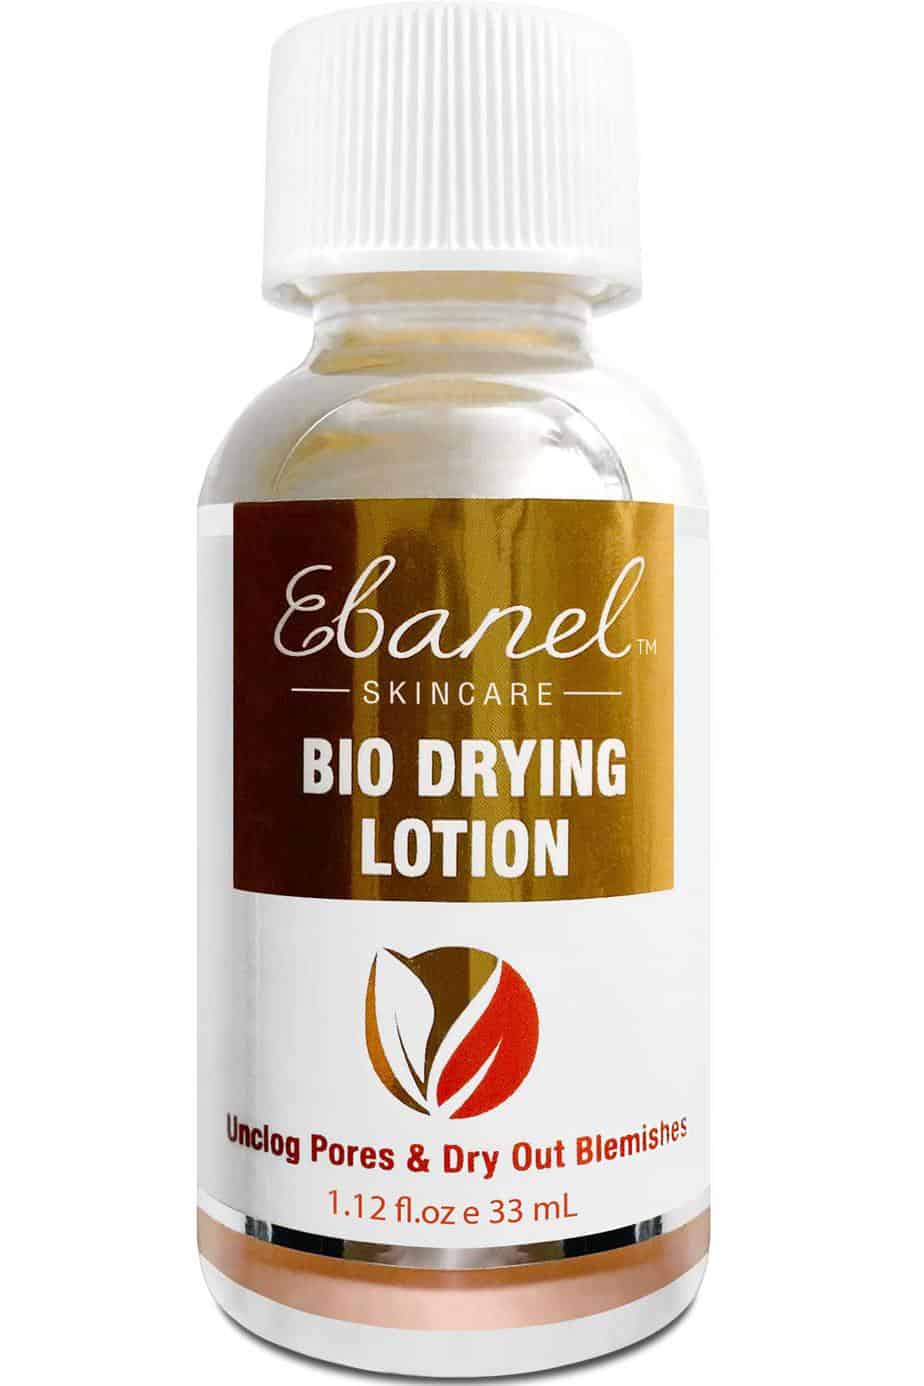 Ebanel bio drying lotion for cystic acne spot treatment